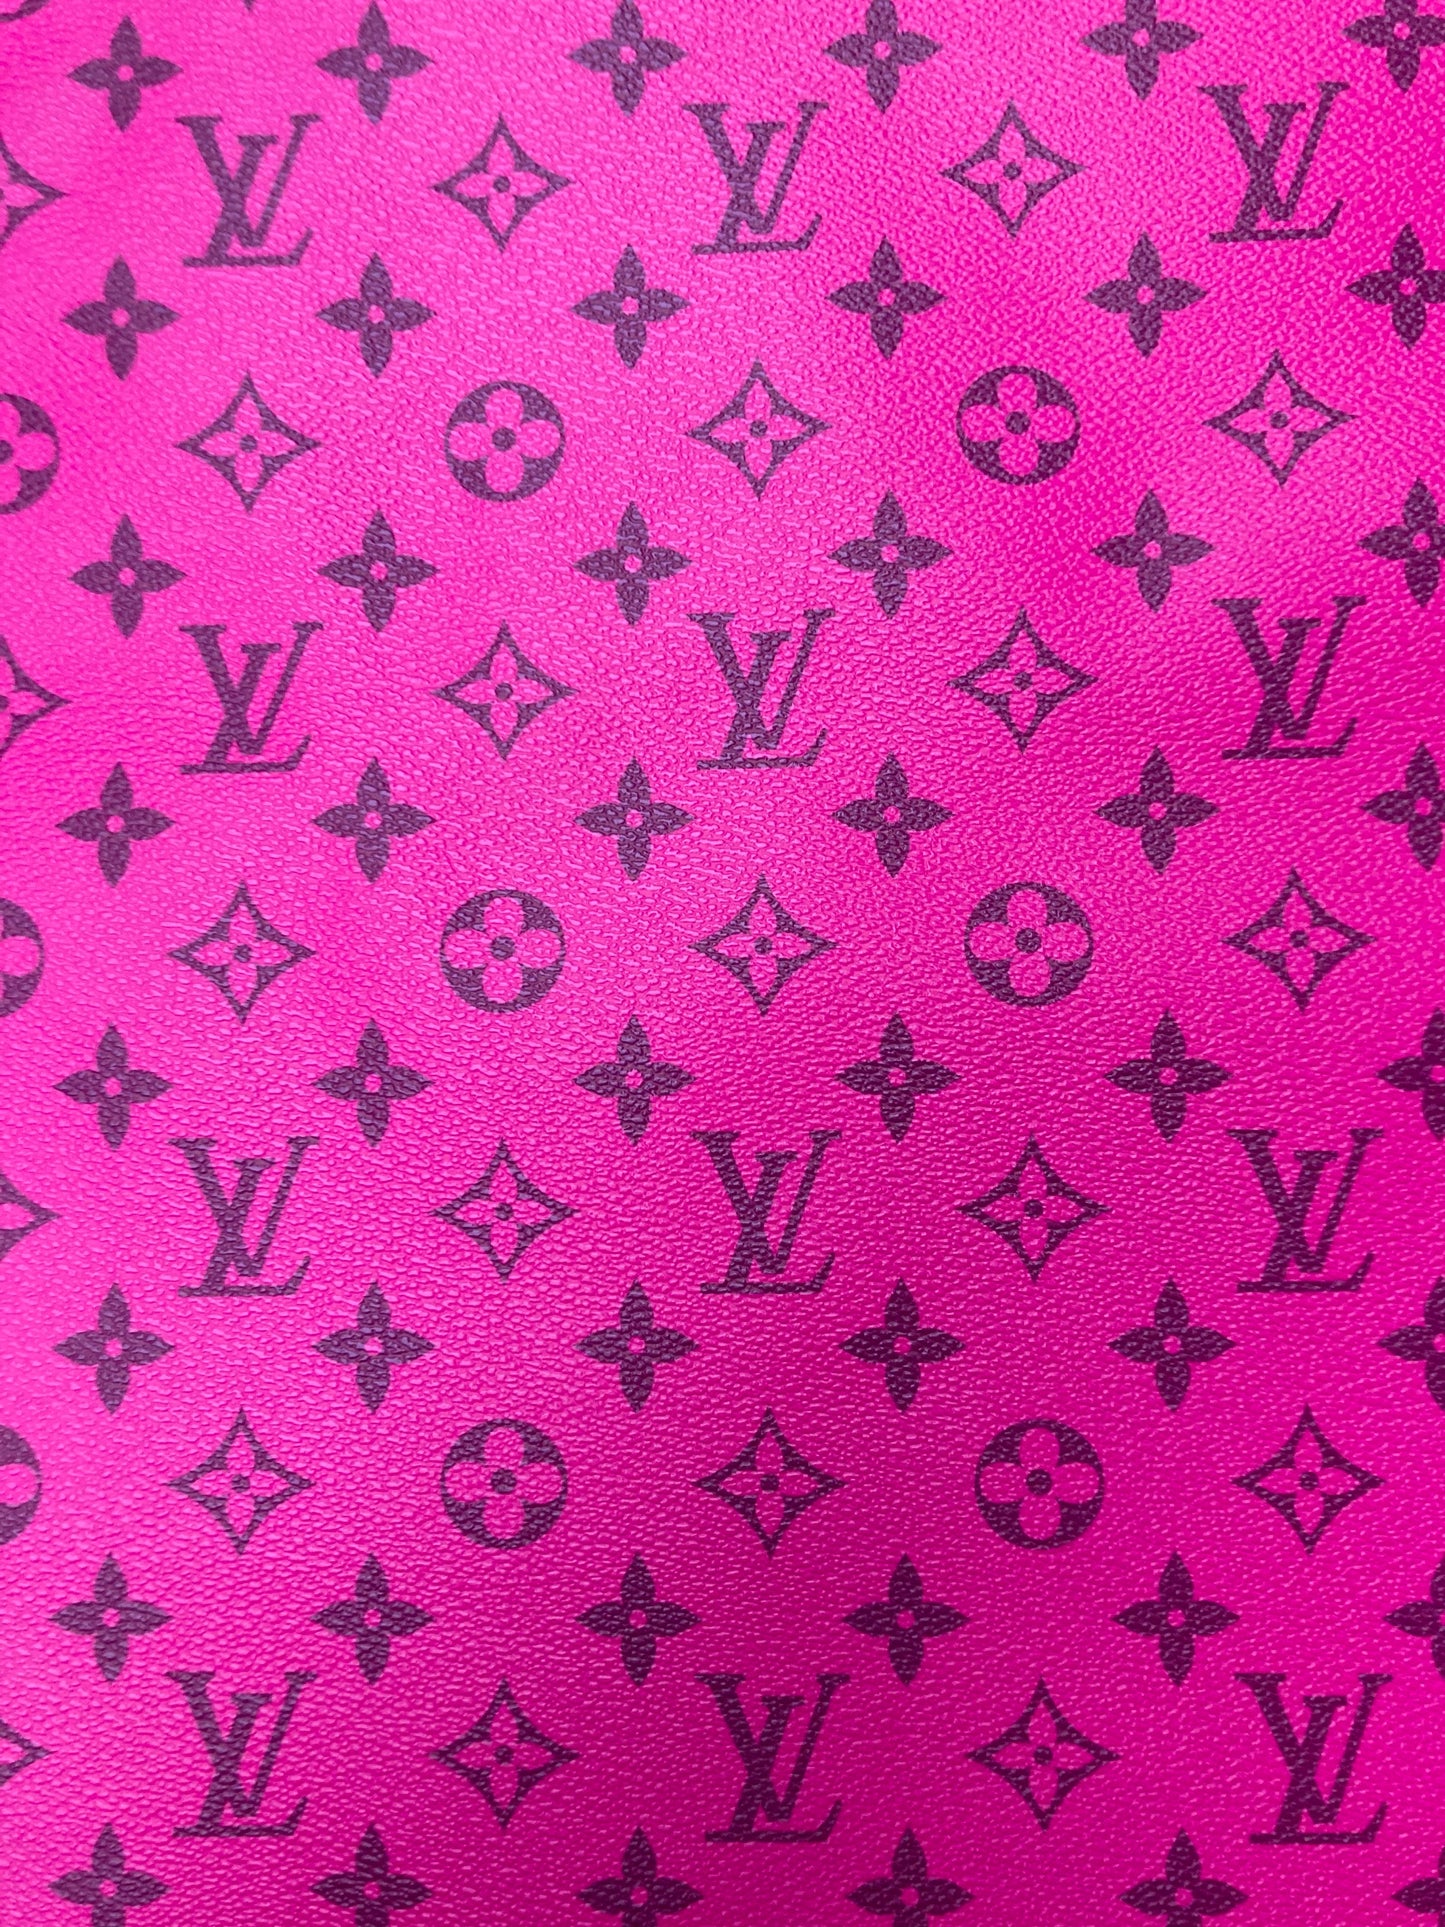 Handmade Custom Hot Pink LV Leather Fabric Material for DIY Project Upholstery